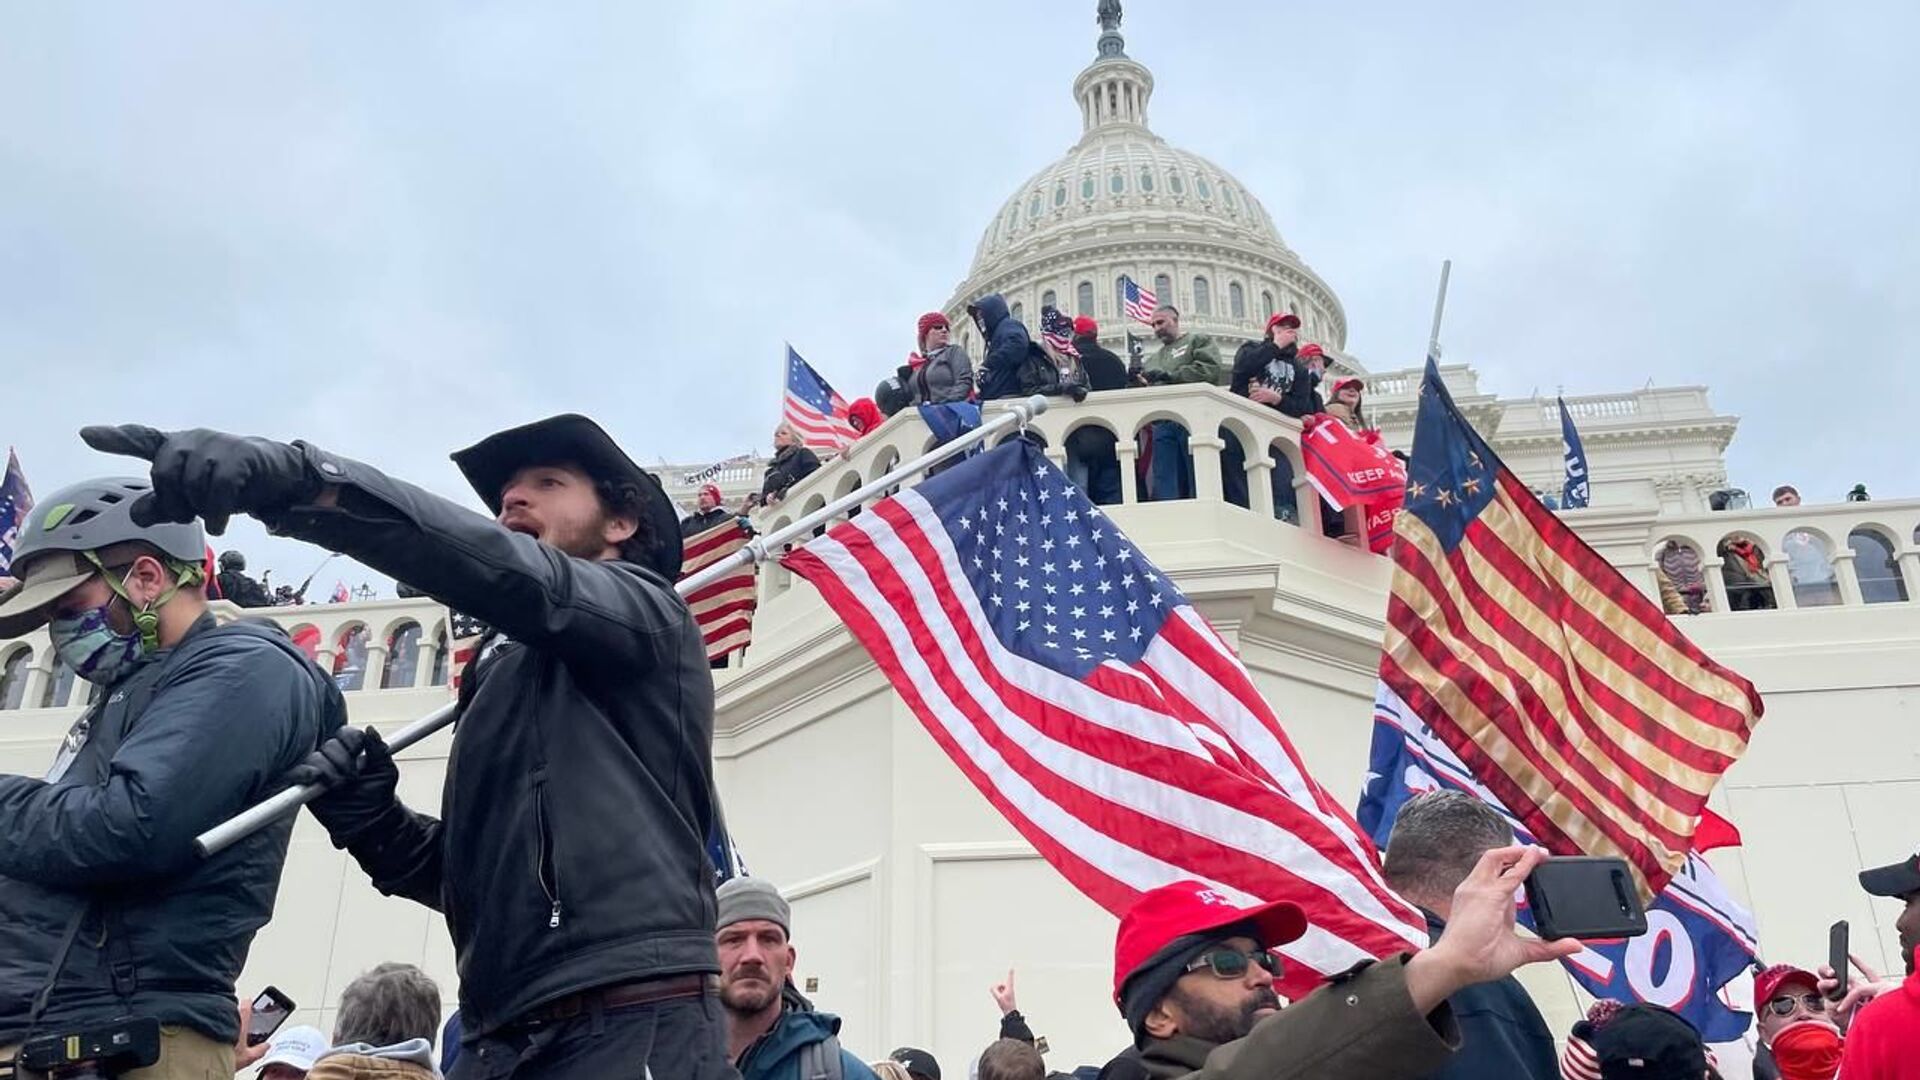 Demonstrators protest outside US Capitol Building in Washington to contest the certification of the 2020 presidential election results by the US Congress, 6 January 2021 - Sputnik International, 1920, 18.03.2021